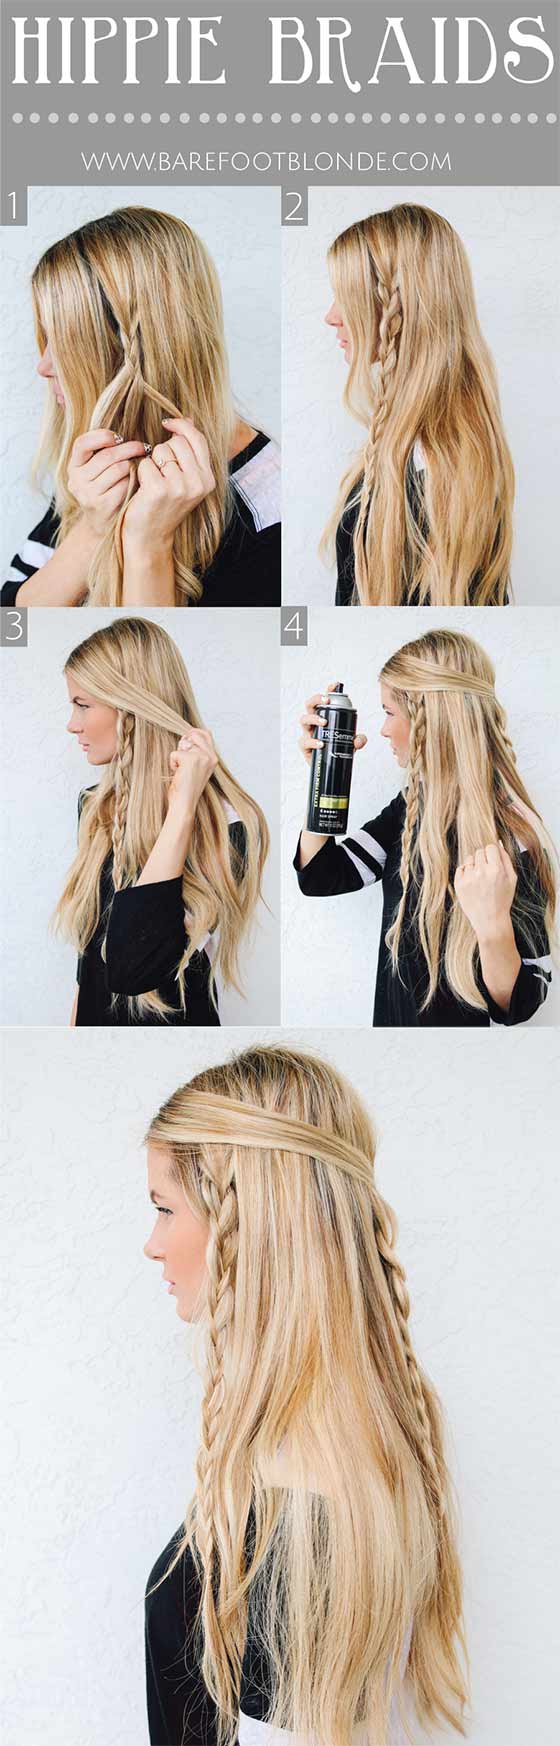 Hippie braided hairstyle for long hair